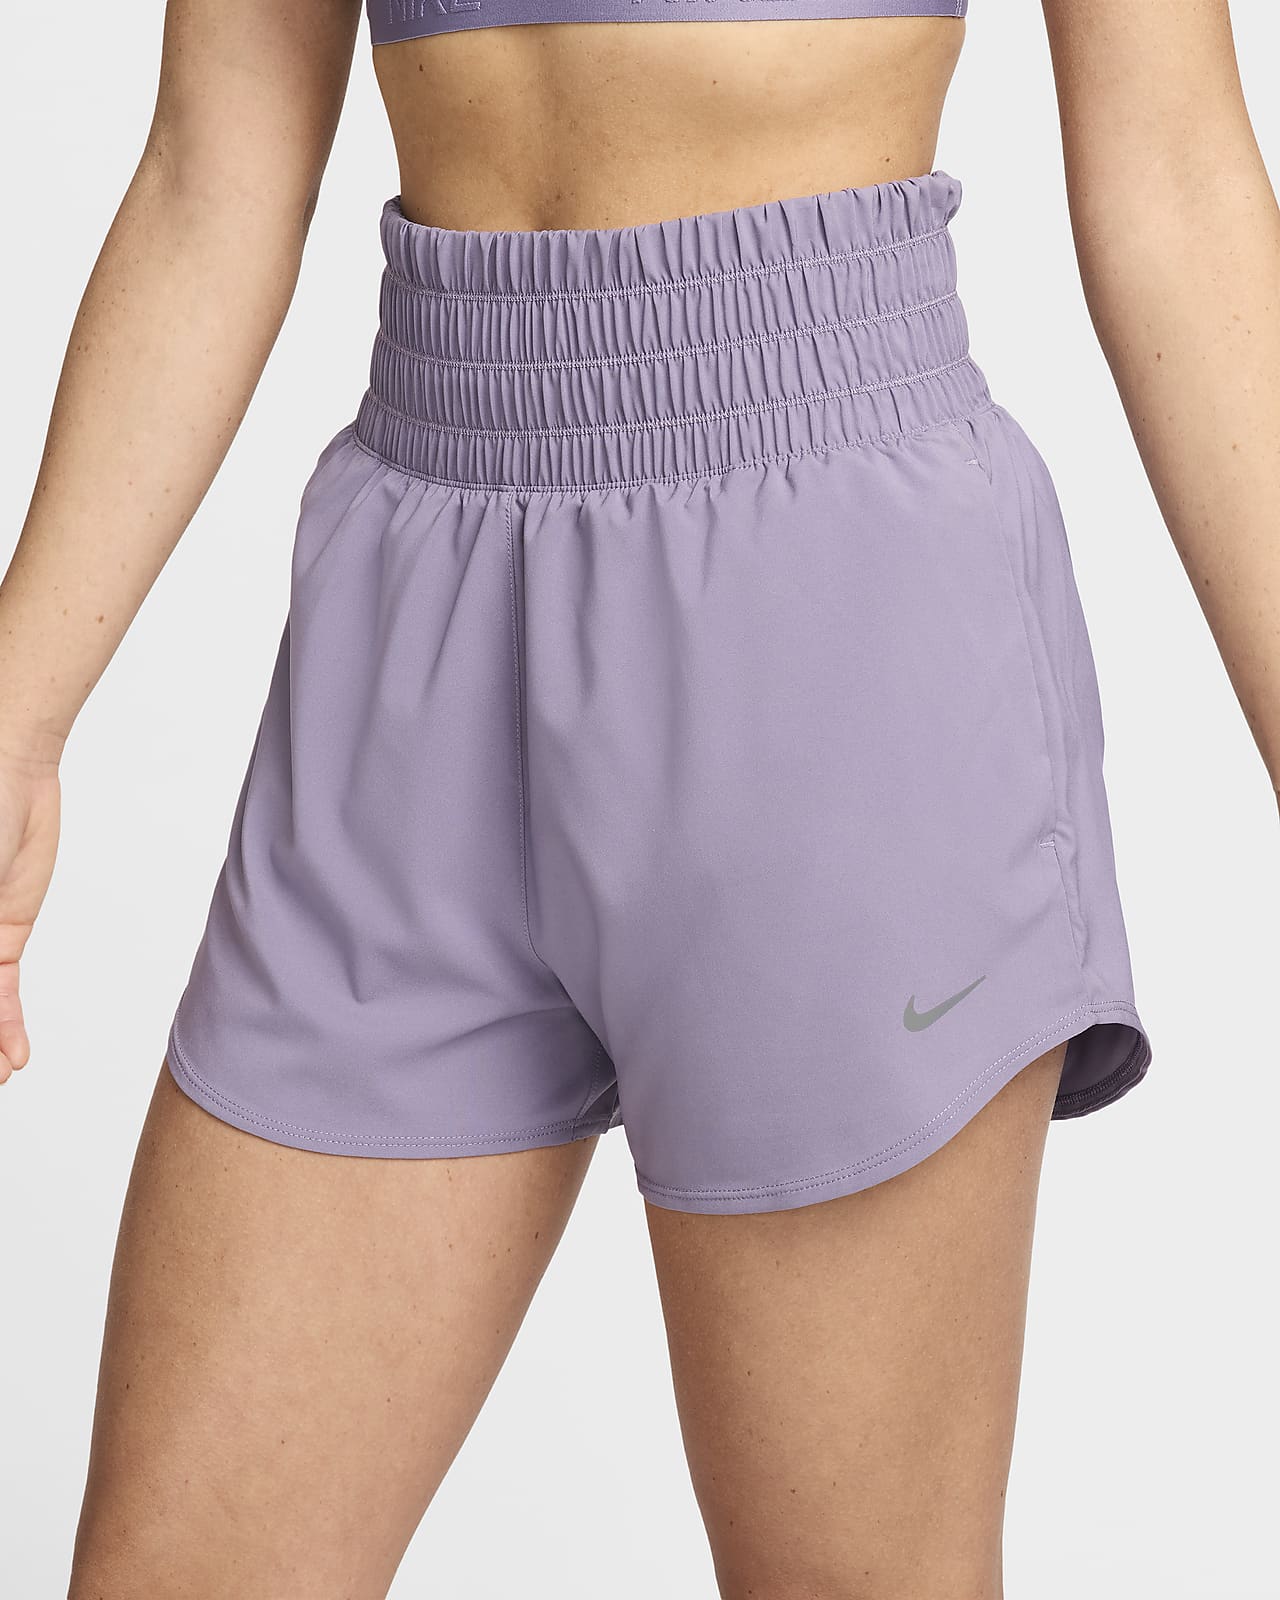 Women's Balance Collection Shorts from $18